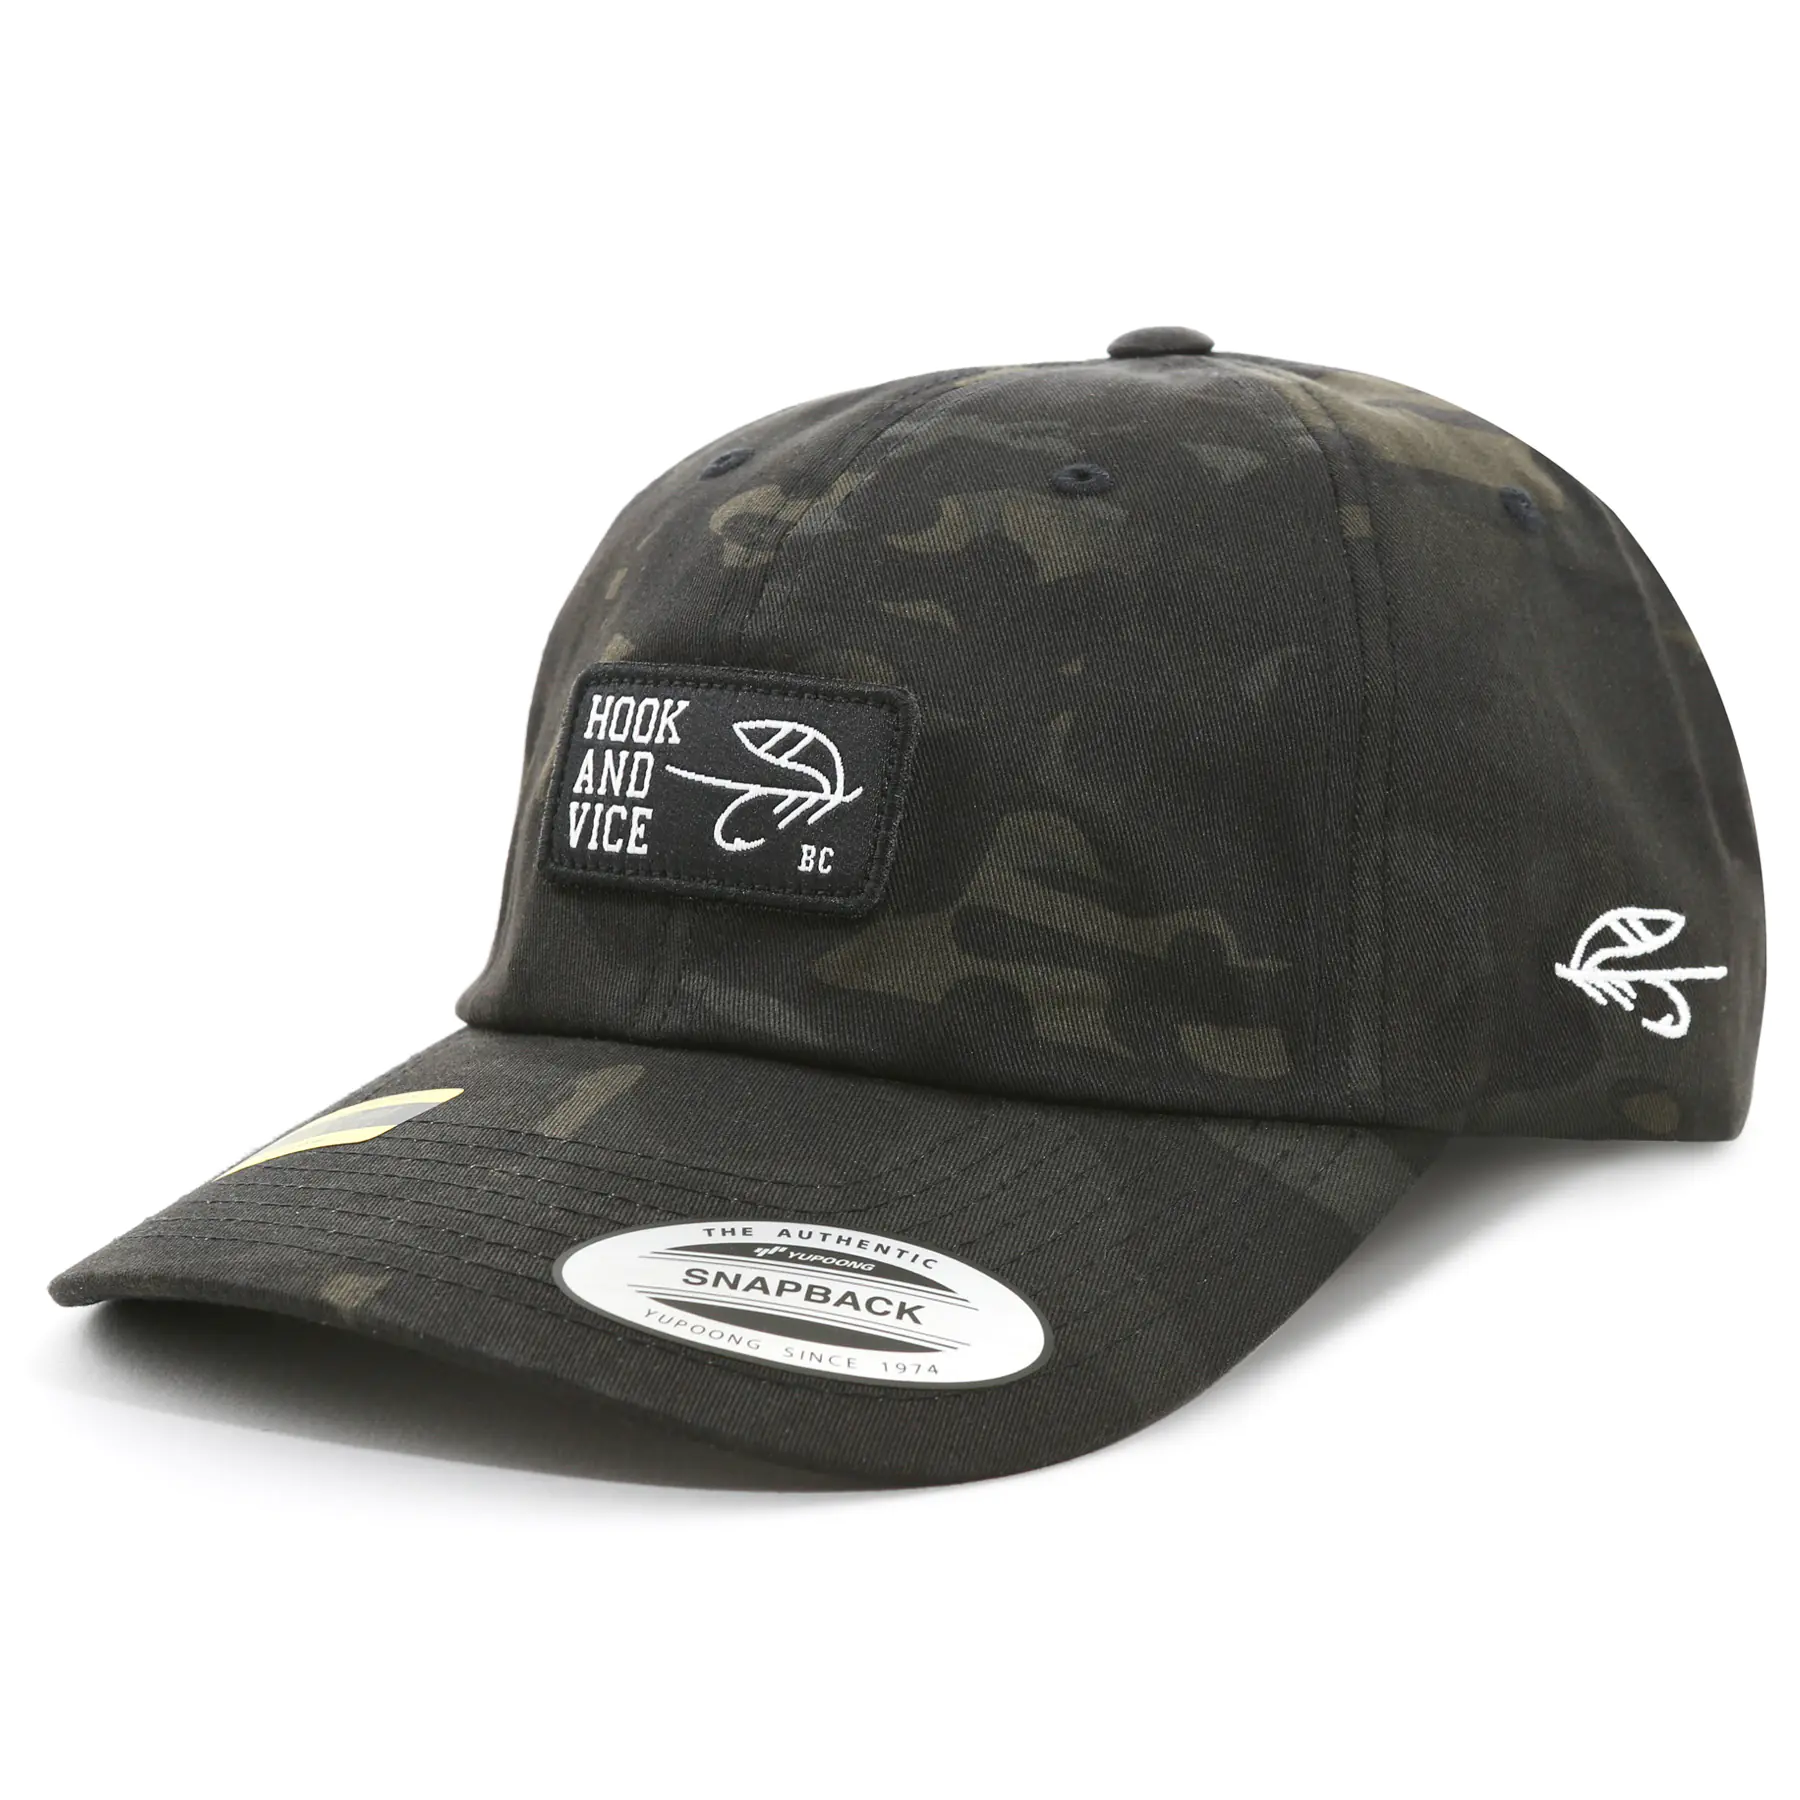 Hook and Vice Pro Model Hat - Camo Camper